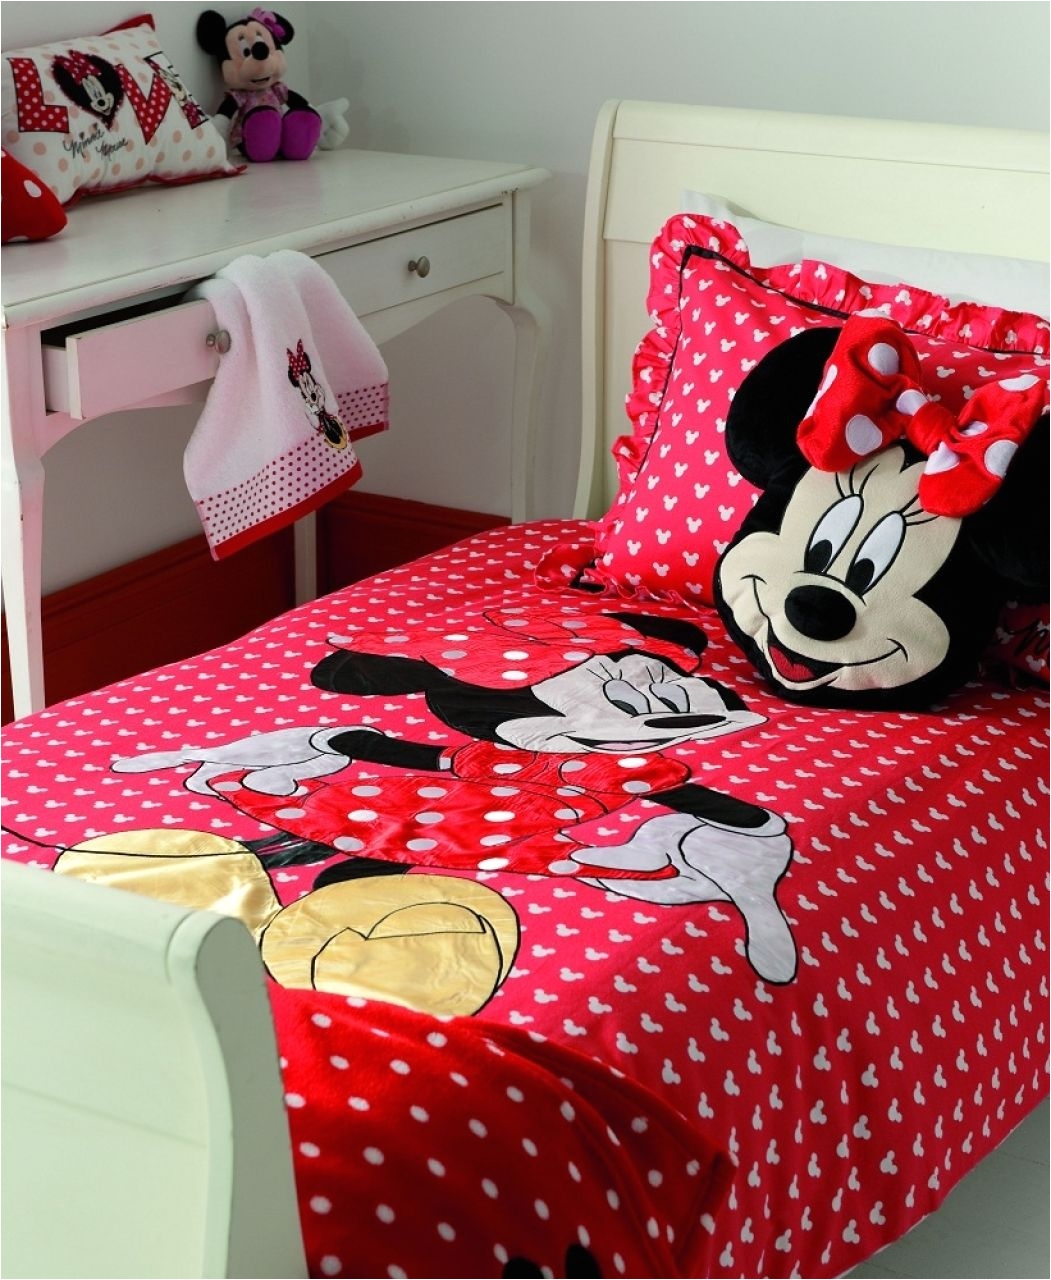 decor mickey and minnie mouse bedding queen size minnie bedroom setg cheap queen size minnie mouse bed setsf amazing cheap queen size minnie mouse bed setsd